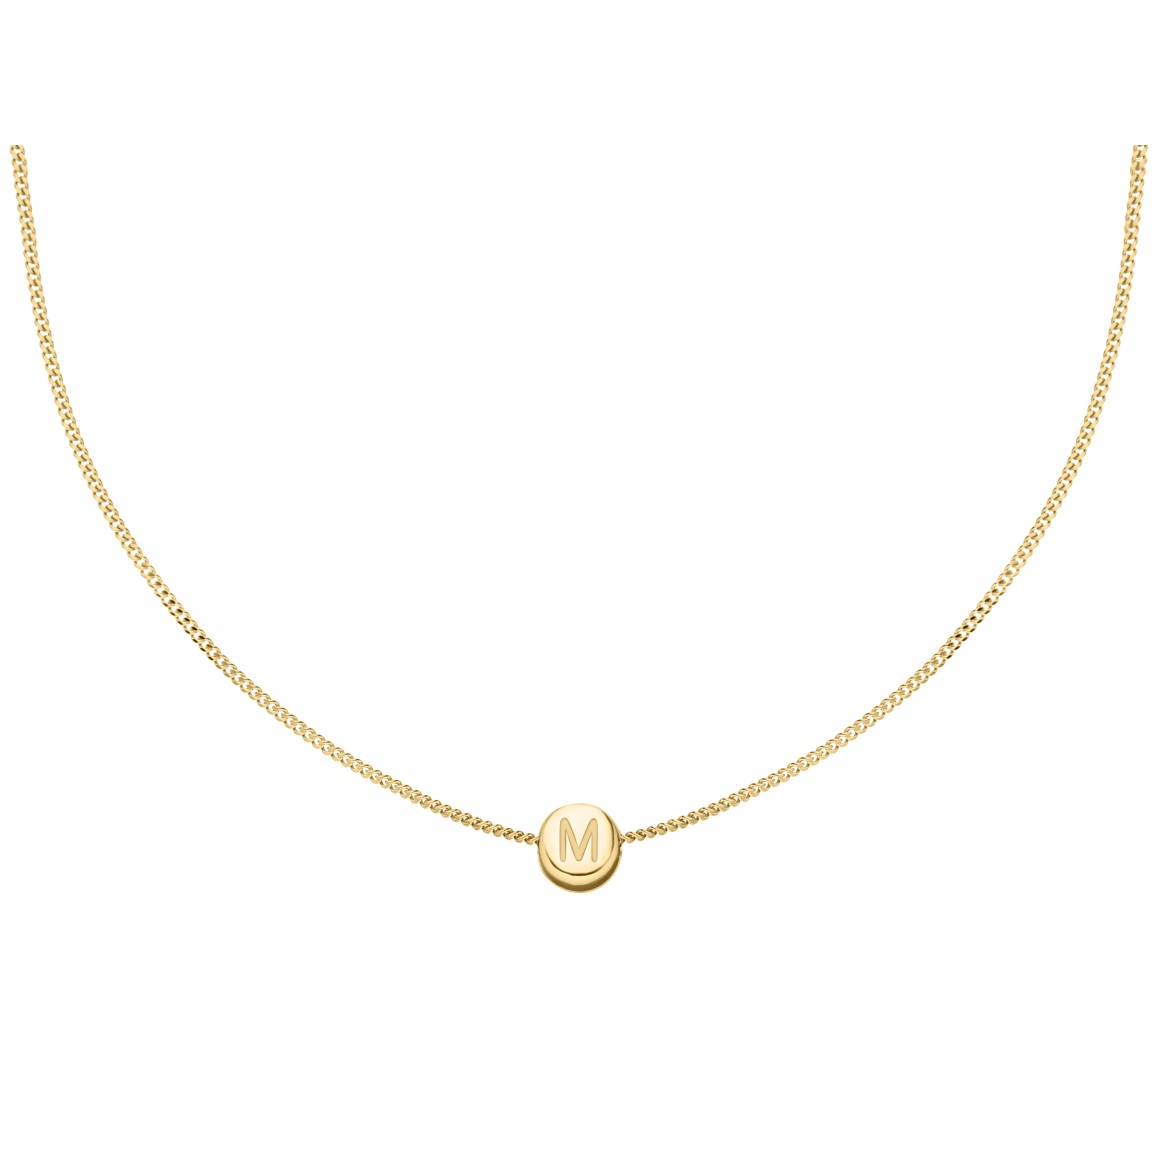 one letter curb chain necklace 18 karat gold